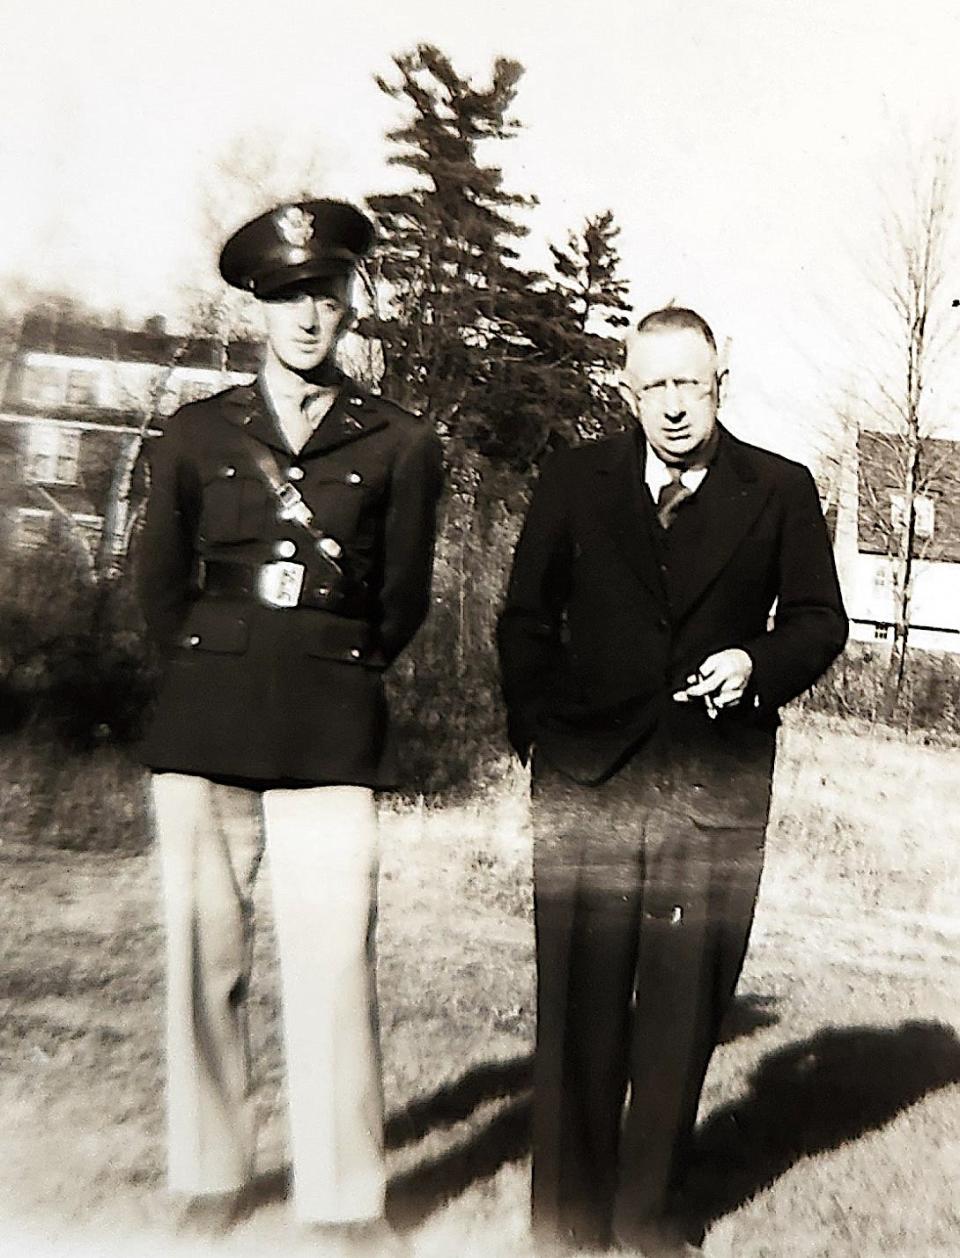 Lt. Robert Waugh, left, with his father, John Waugh, probably in 1943.